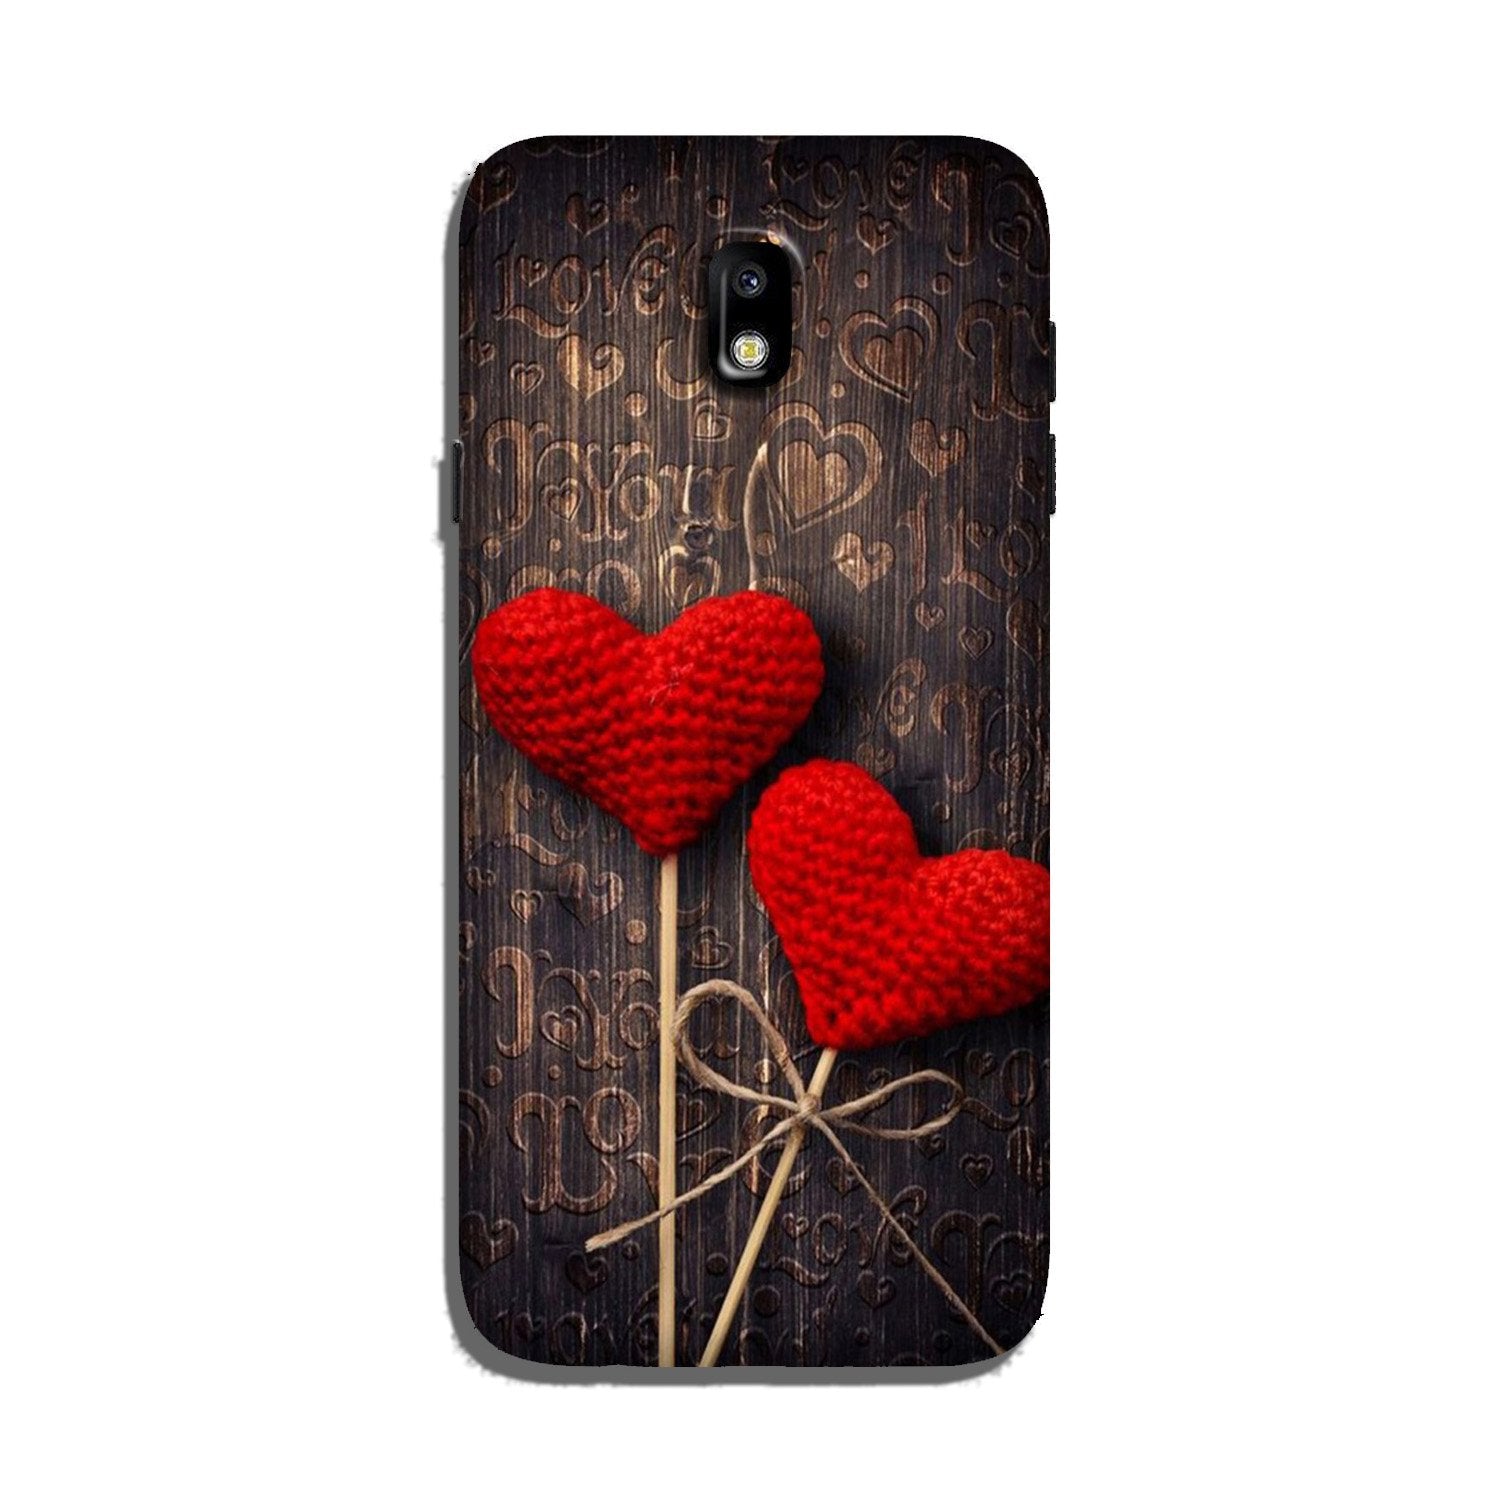 Red Hearts Case for Galaxy J7 Pro